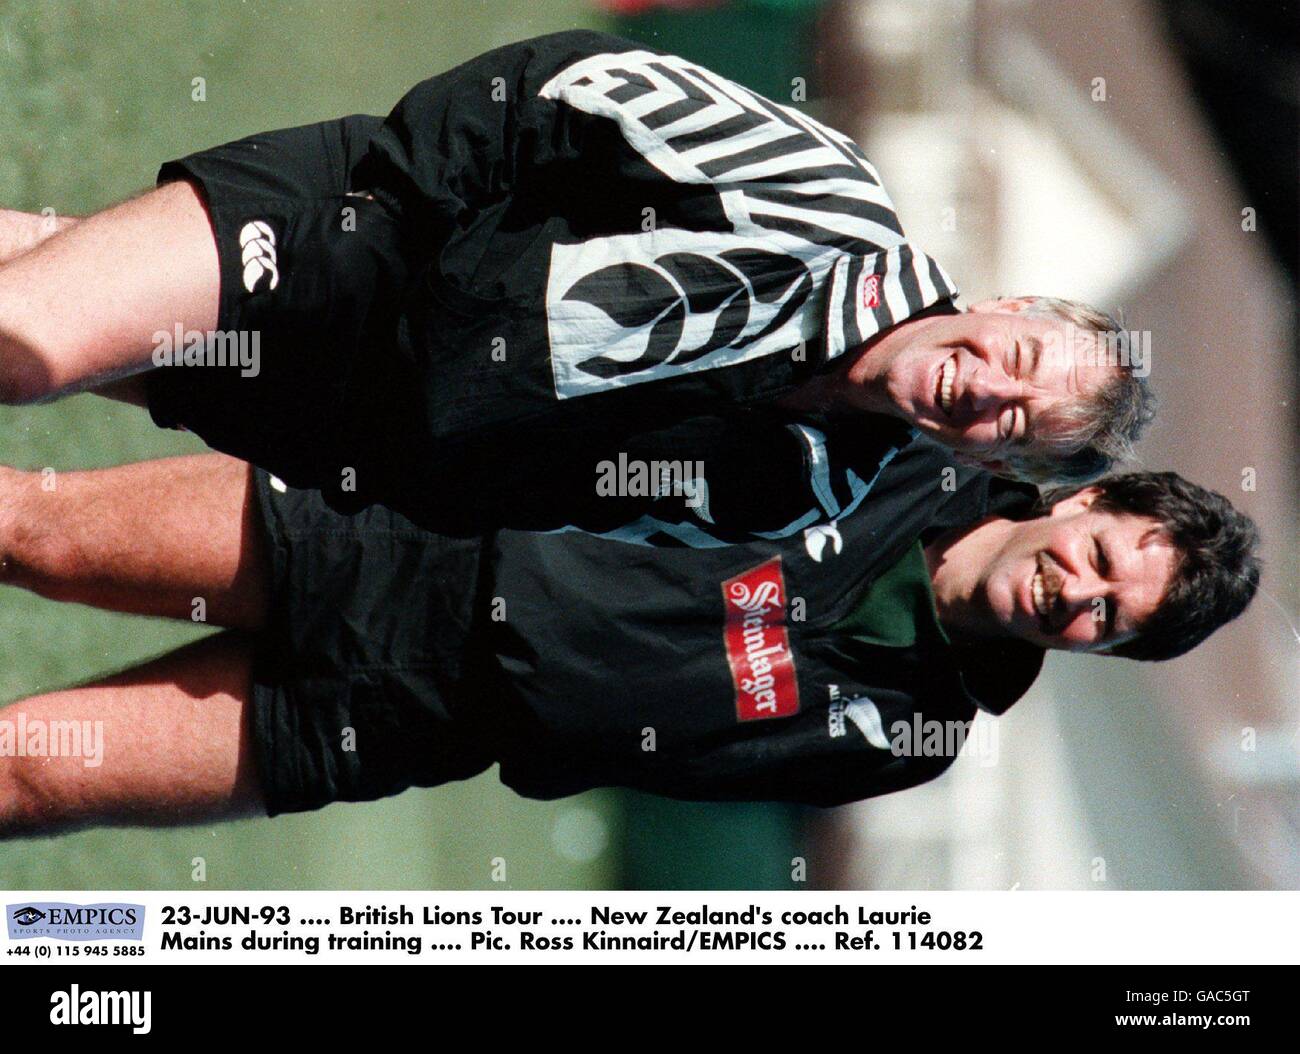 23-JUN-93, British Lions Tour, New Zealand's coach Laurie Mains during training Stock Photo